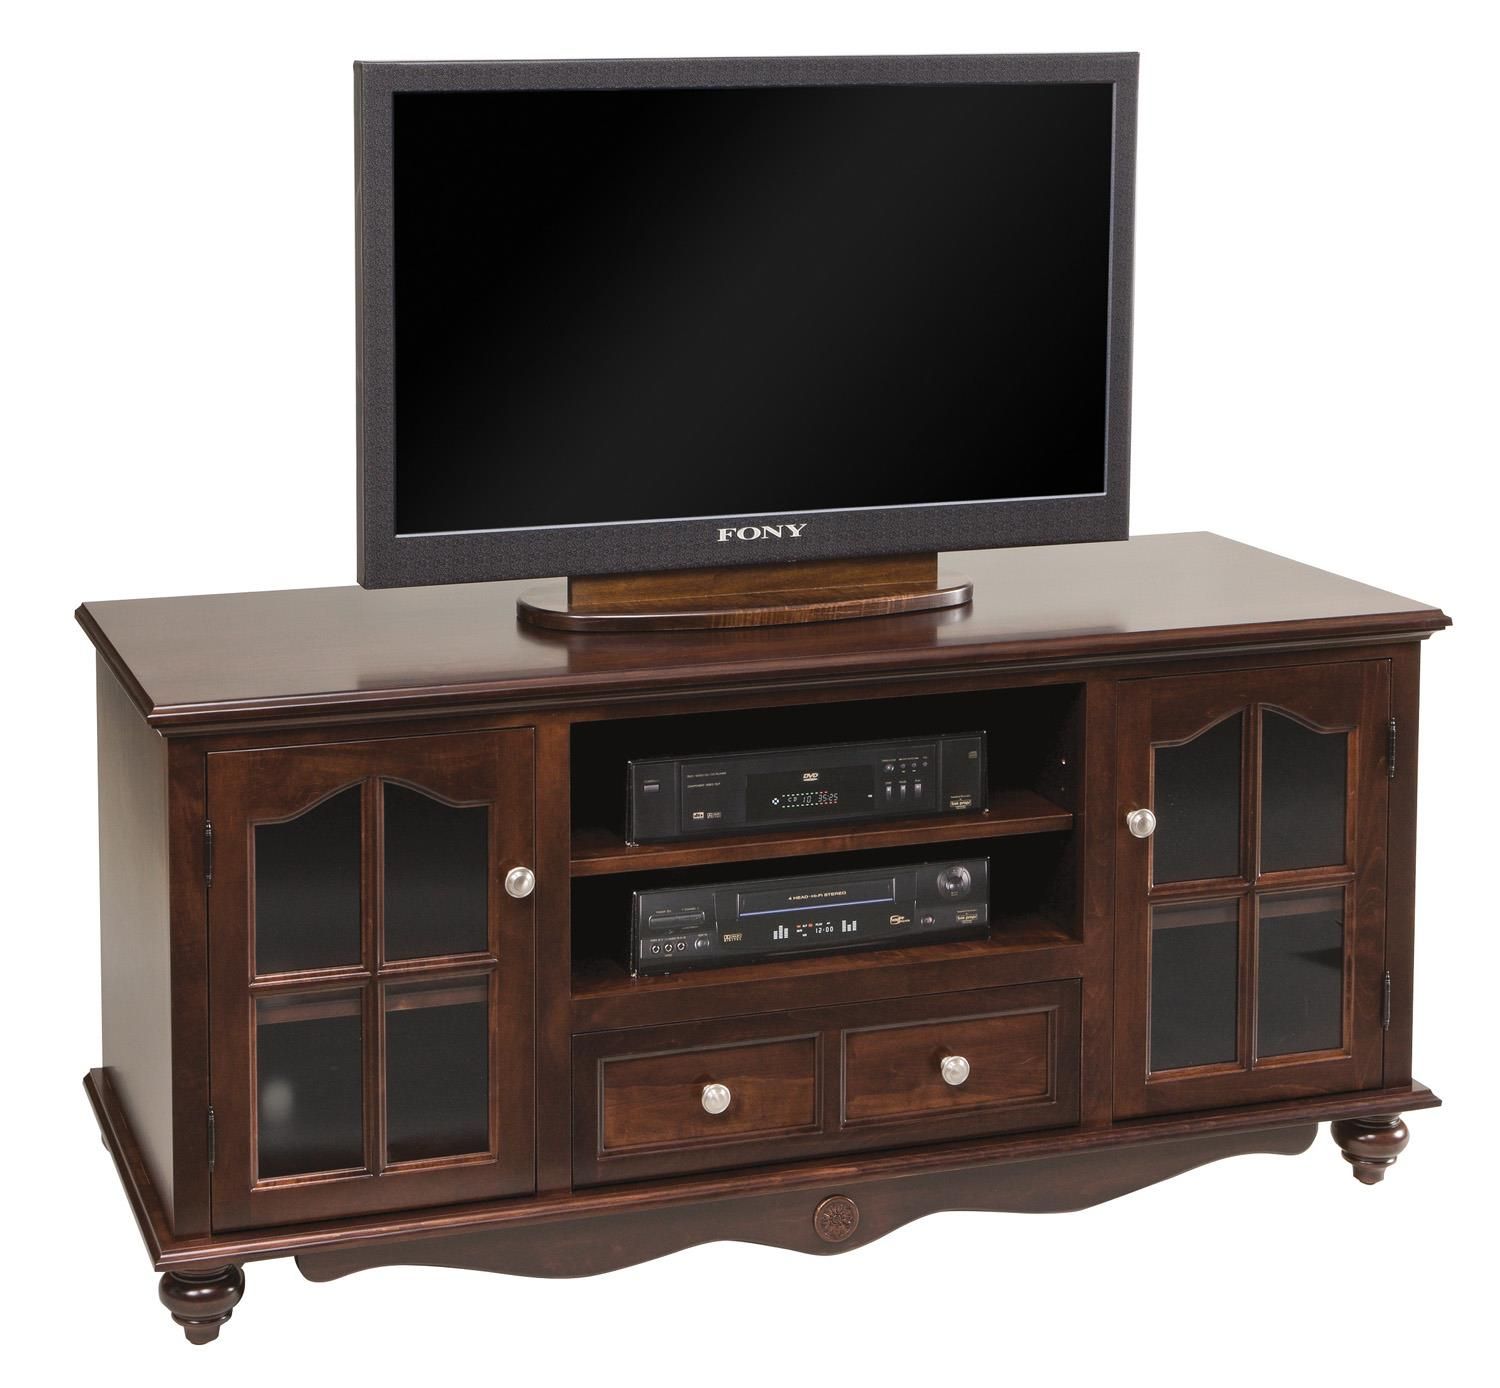 Solid Wood Tv Stand With Drawers With Regard To Solid Pine Tv Cabinets (View 5 of 15)